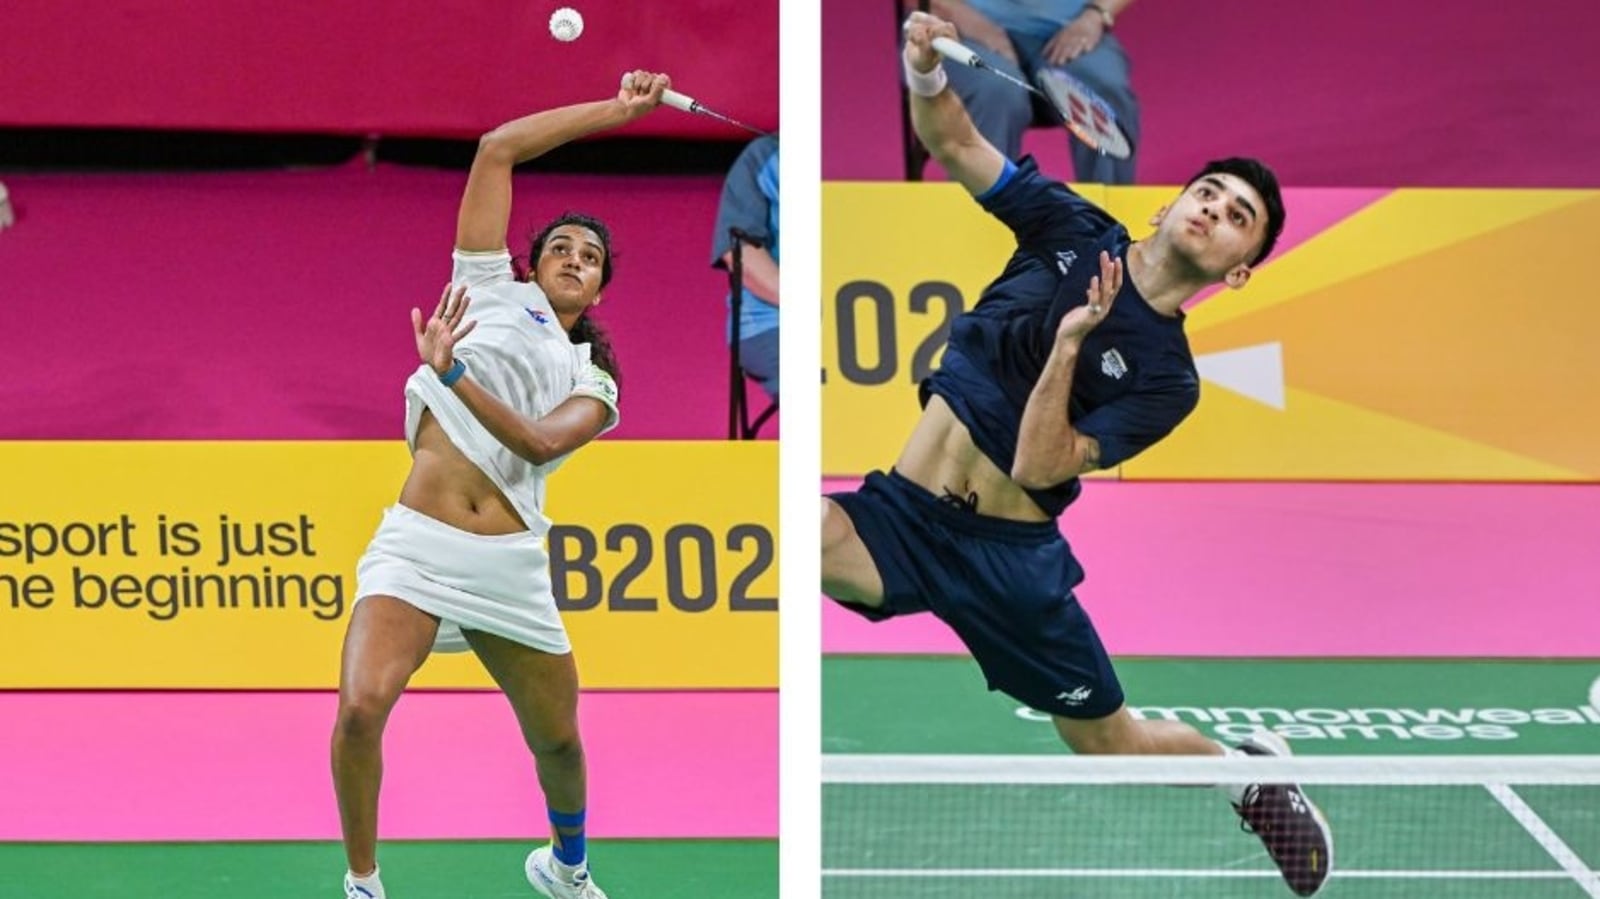 Watch Sindhu, Lakshya show pure class with gold medal-winning shots at CWG 2022